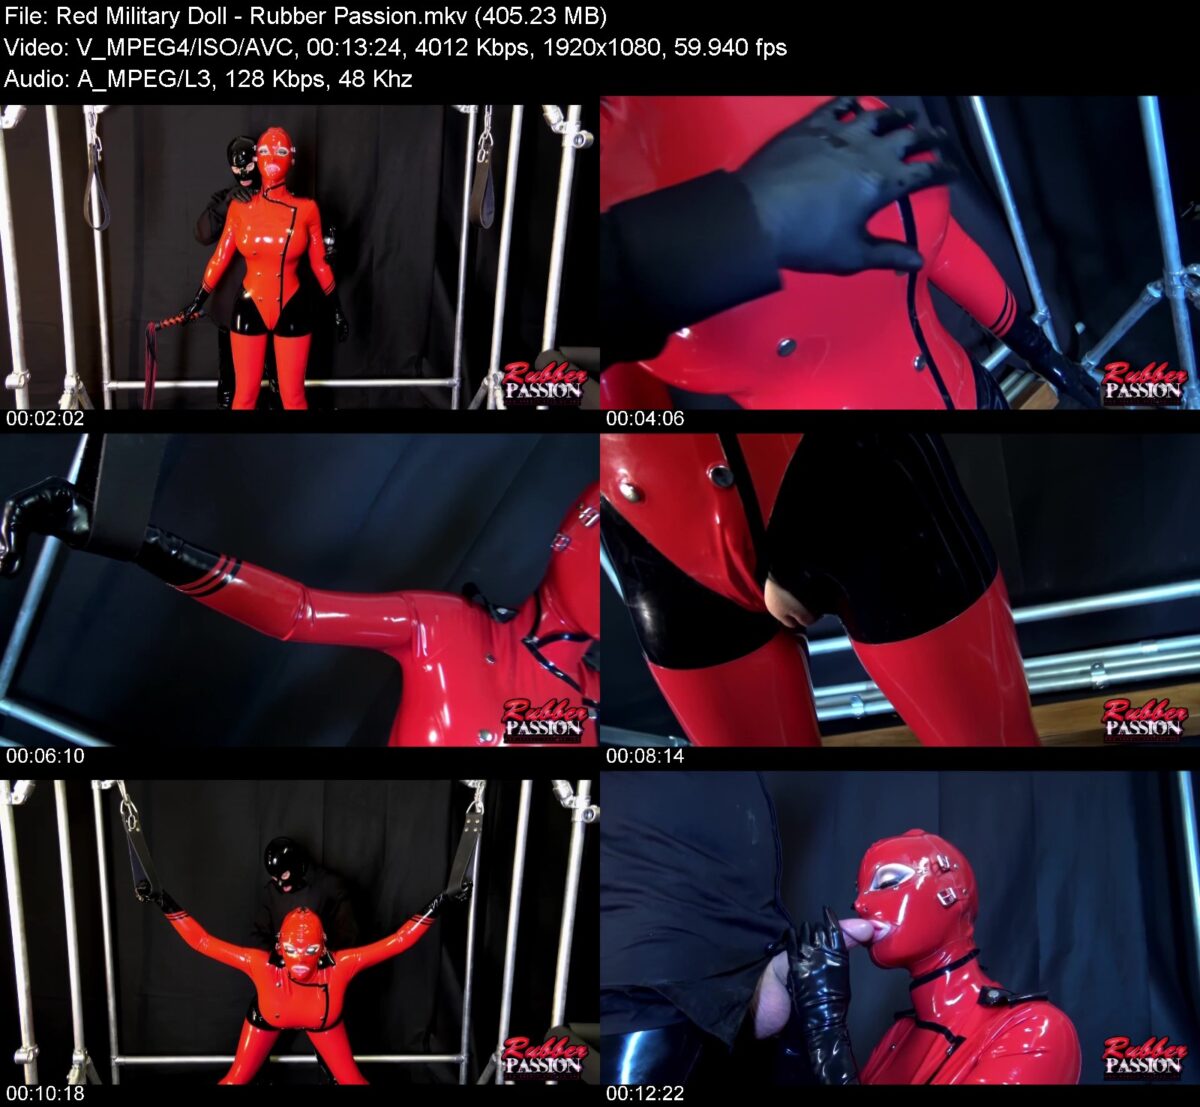 Actress: Red Military Doll. Title and Studio: Rubber Passion